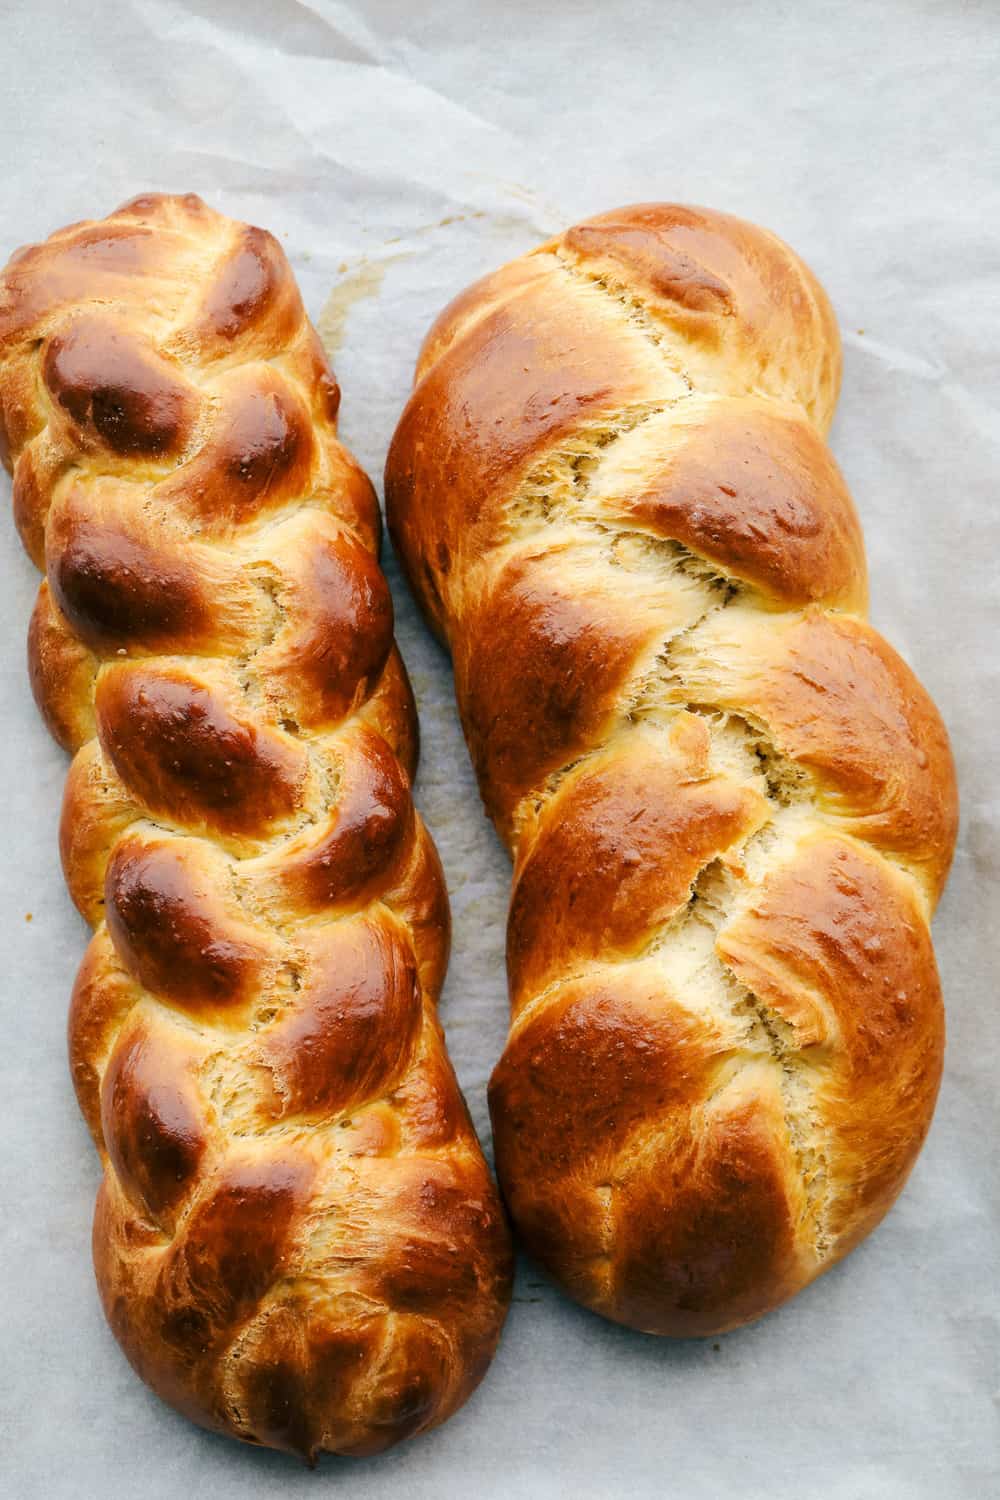 Baked six and three strand braided challah. 